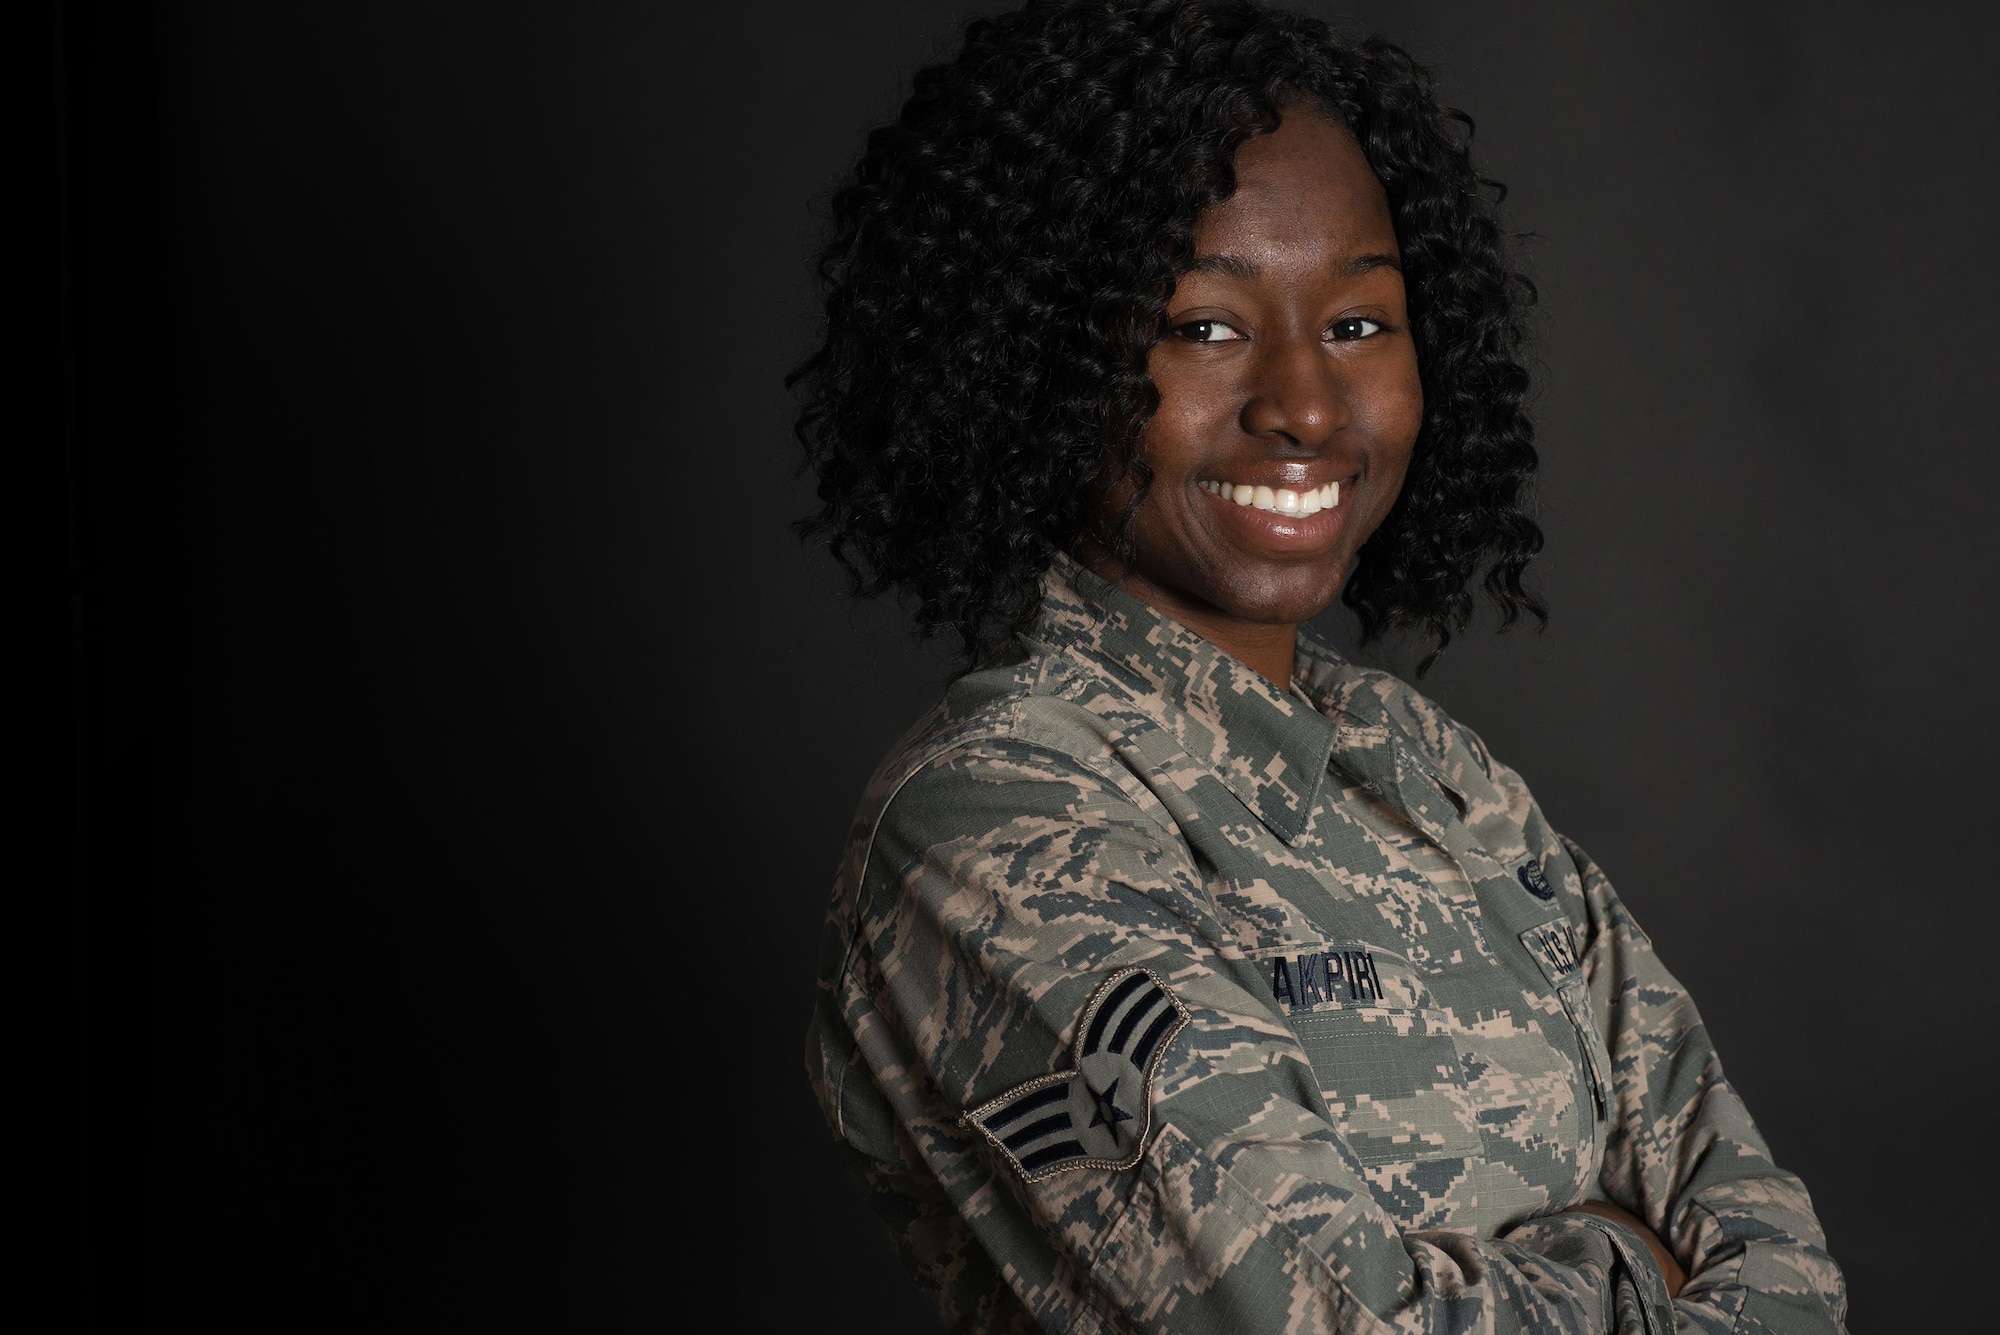 Senior Airman Amy Akpiri received the Freedom Citation Speech Award while attending Airman Leadership School in residence at Tinker Air Force Base, Oklahoma, Nov. 9, 2016 to Dec. 15, 2016.